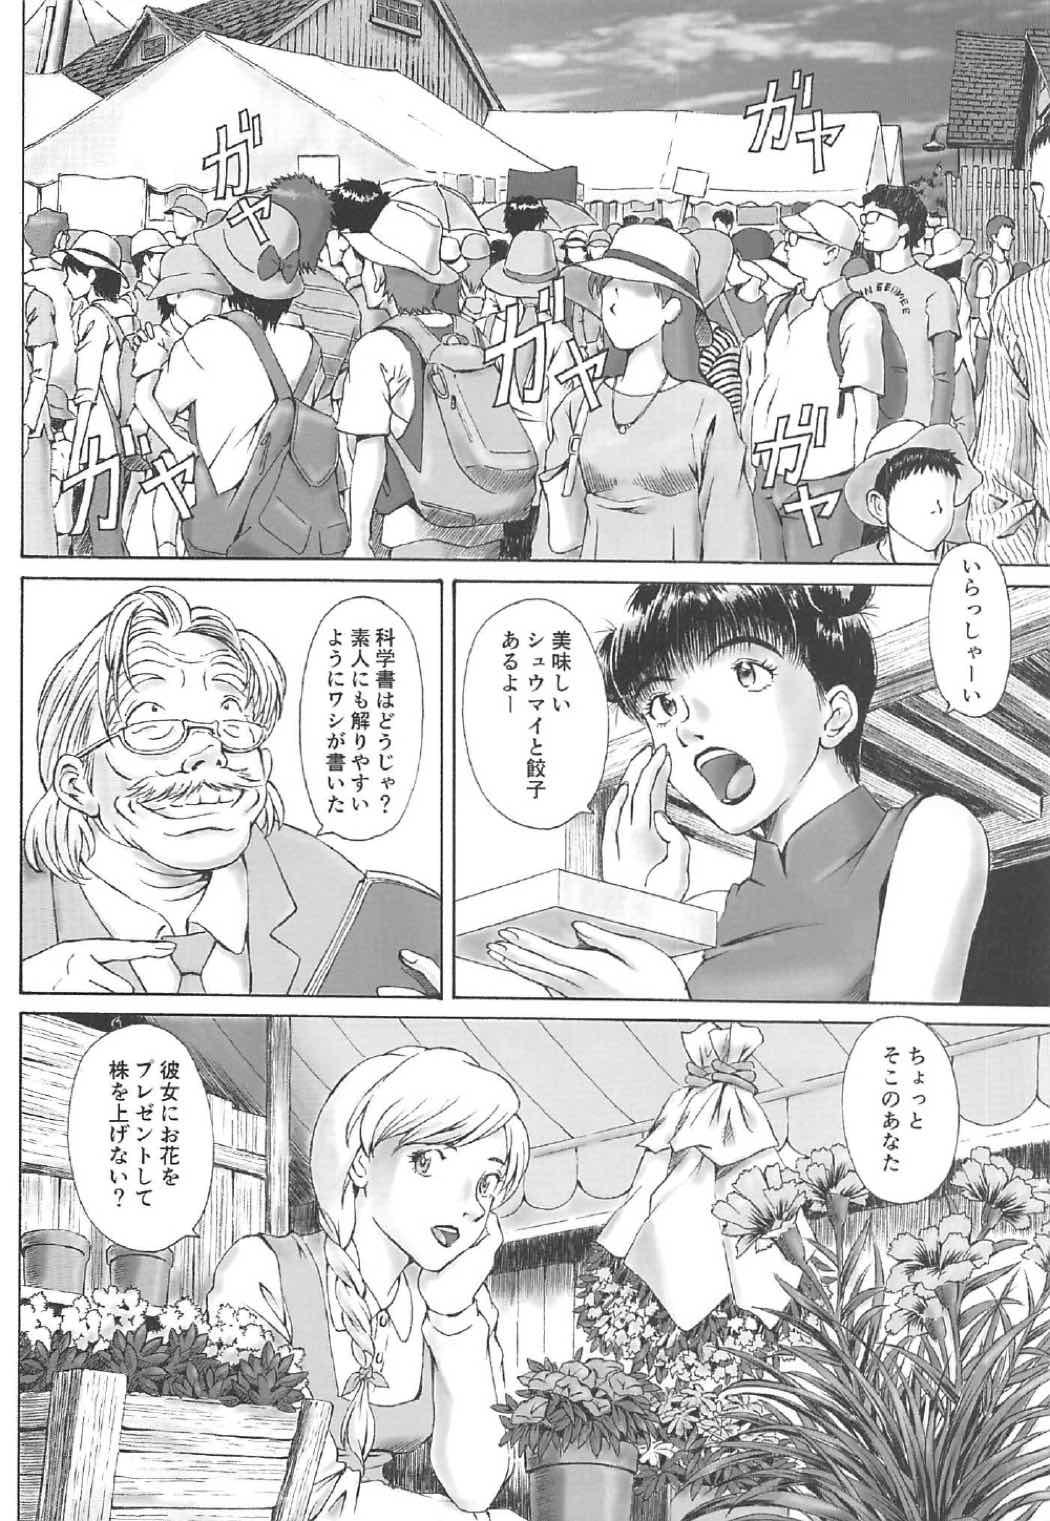 Strap On Misuse - Neon genesis evangelion Gay Orgy - Page 7